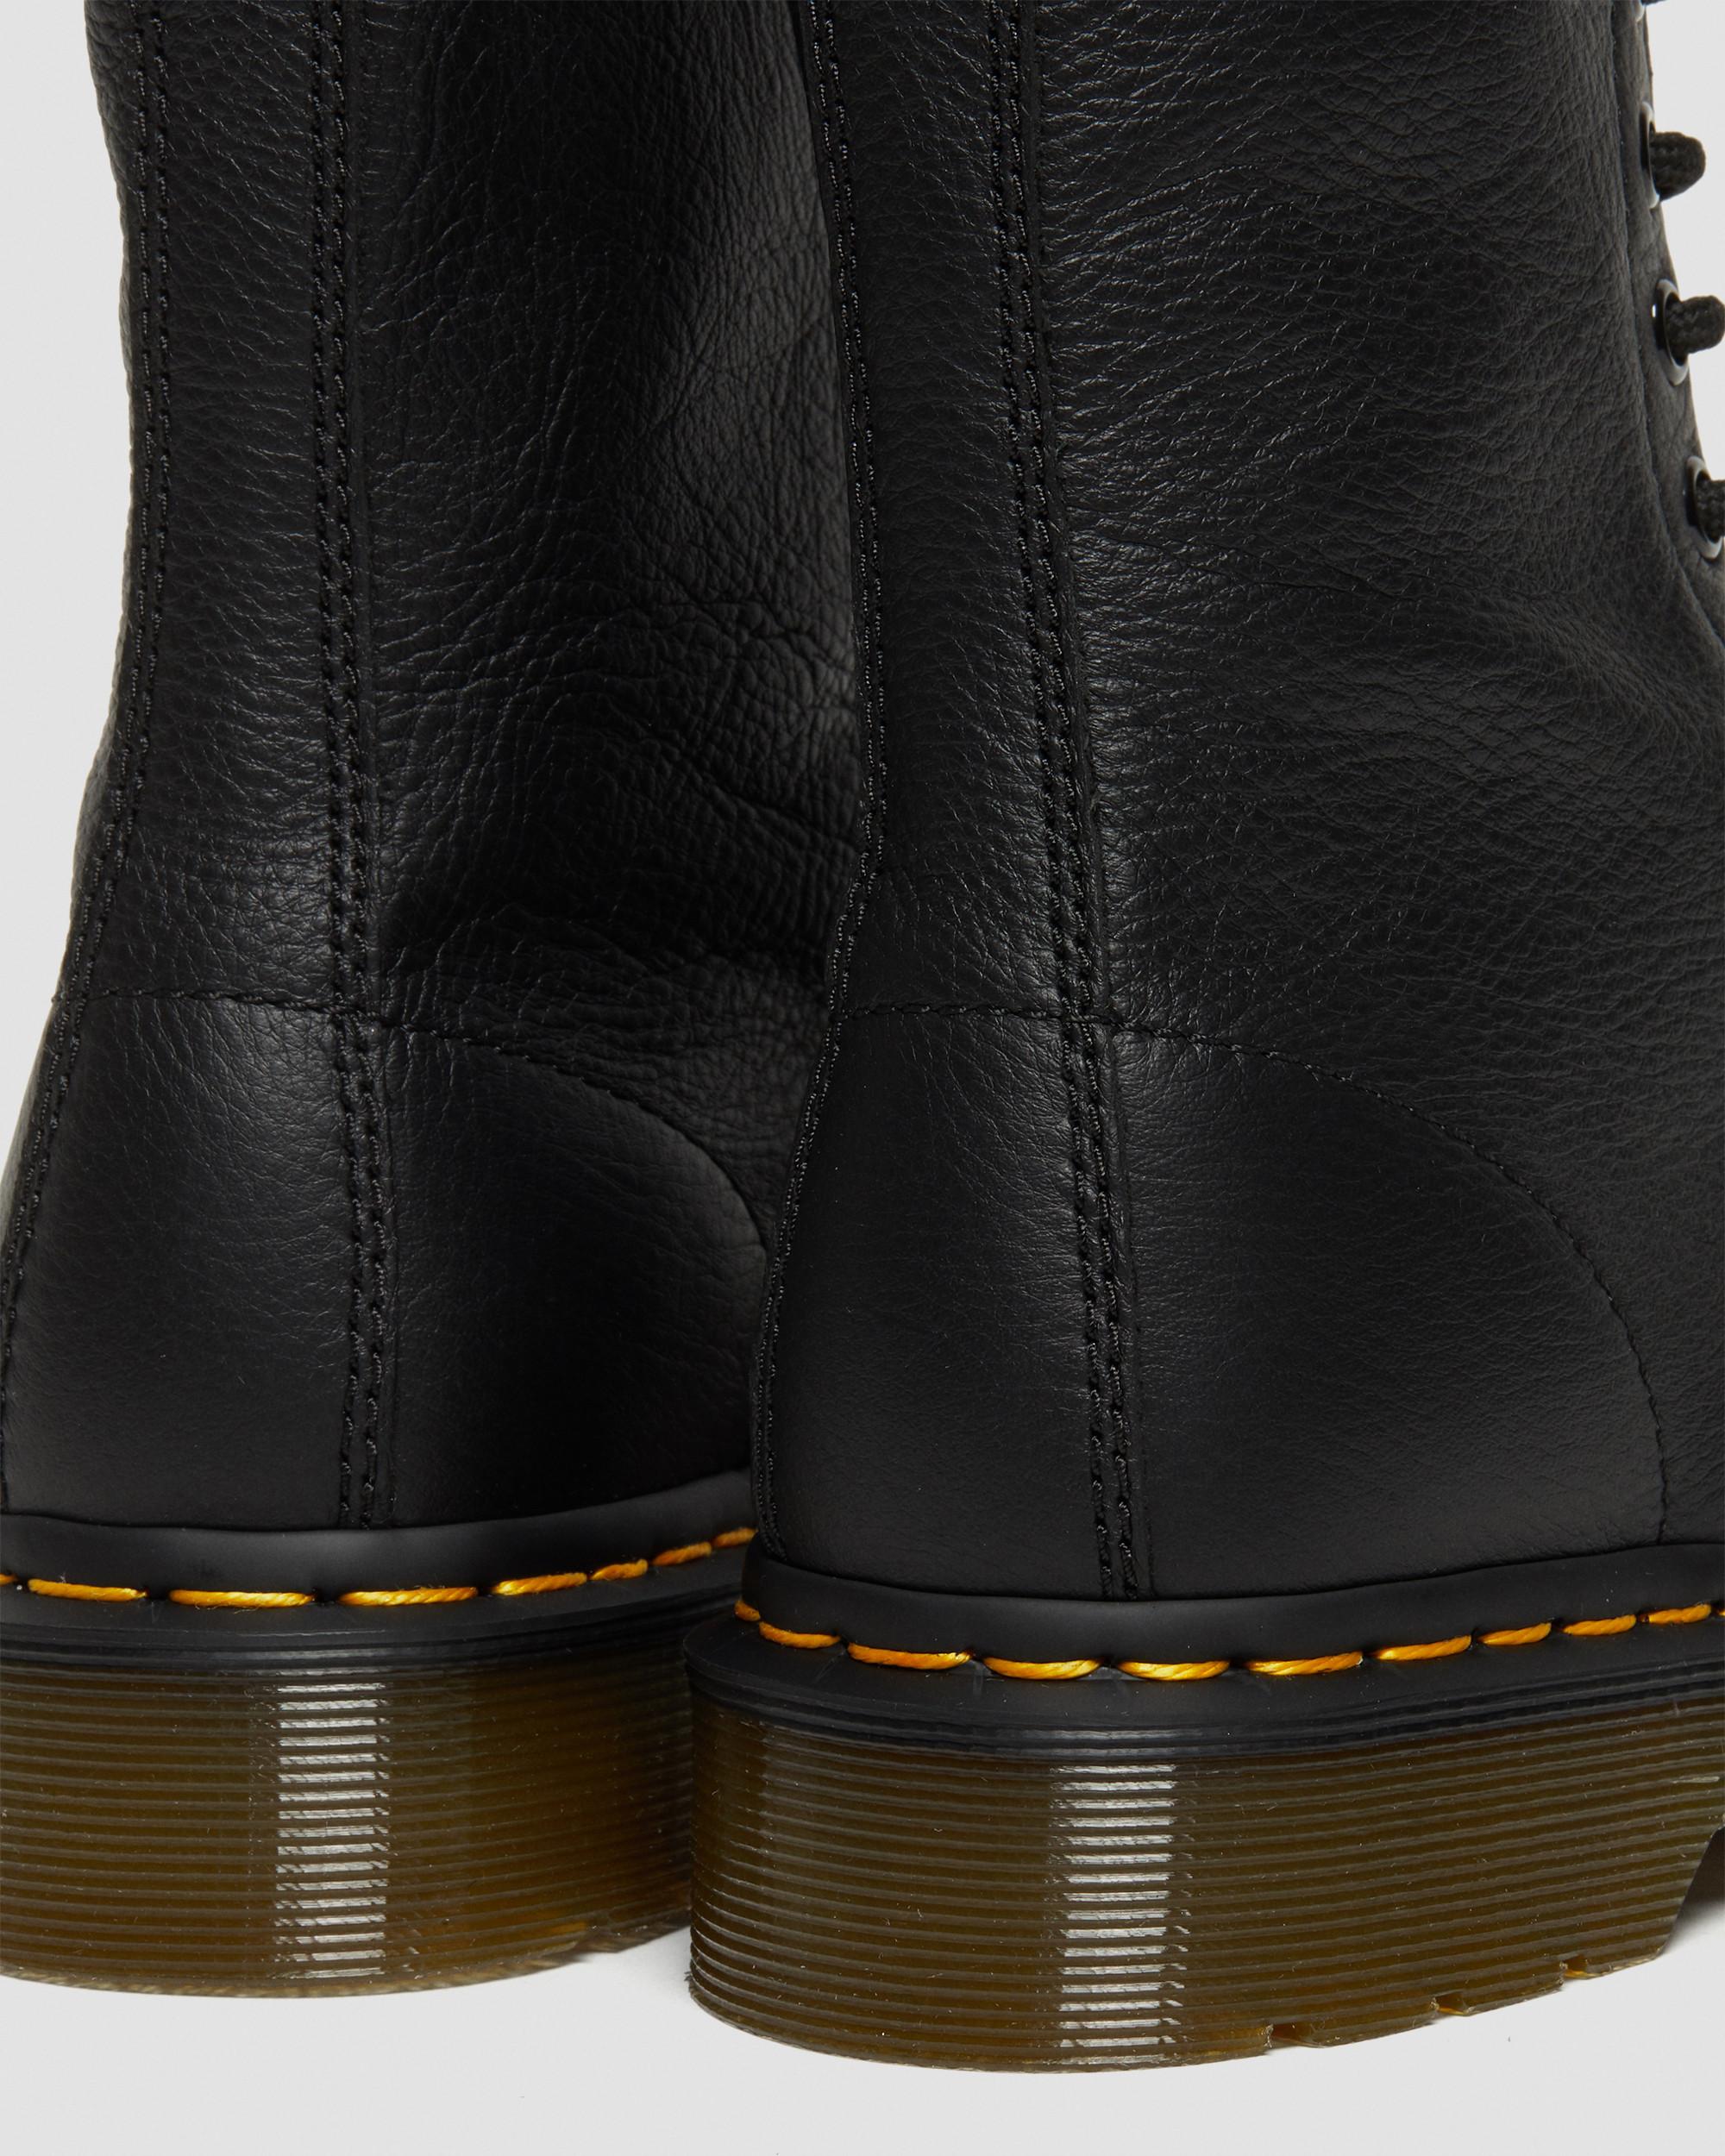 1490 Virginia Leather High Boots1490 Virginia Leather High Boots Dr. Martens